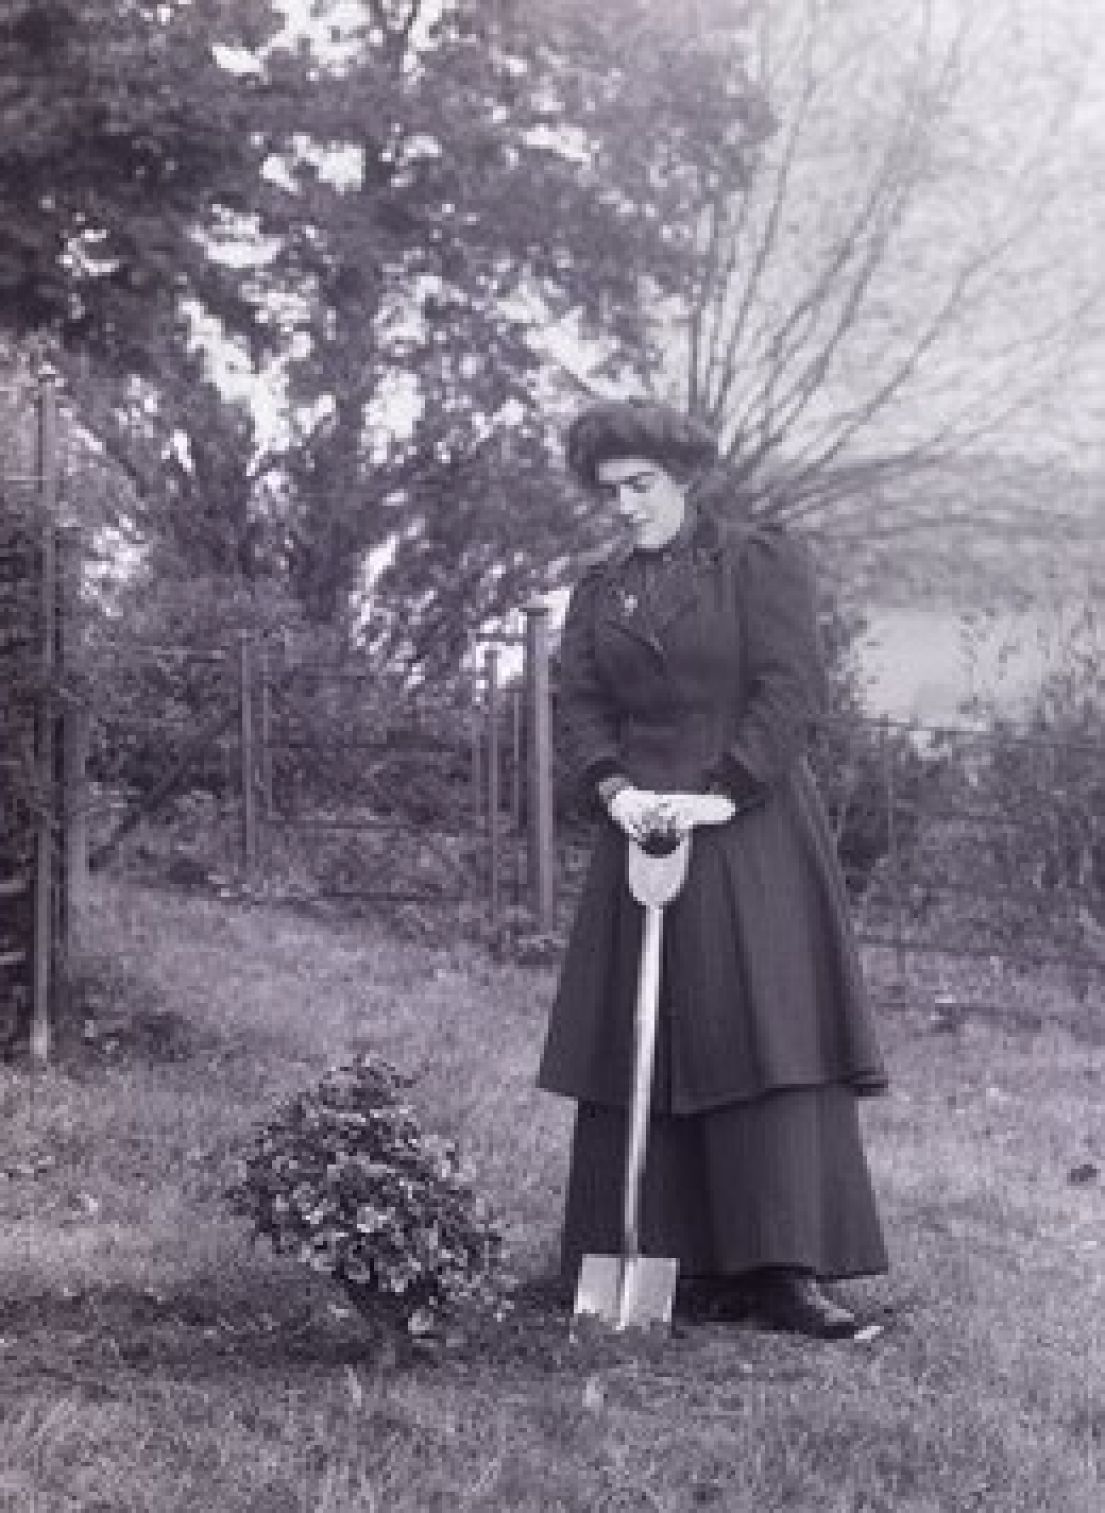 A black and white image of a suffragette, holding a spade and admiring a rather small tree as if it has just been planted.